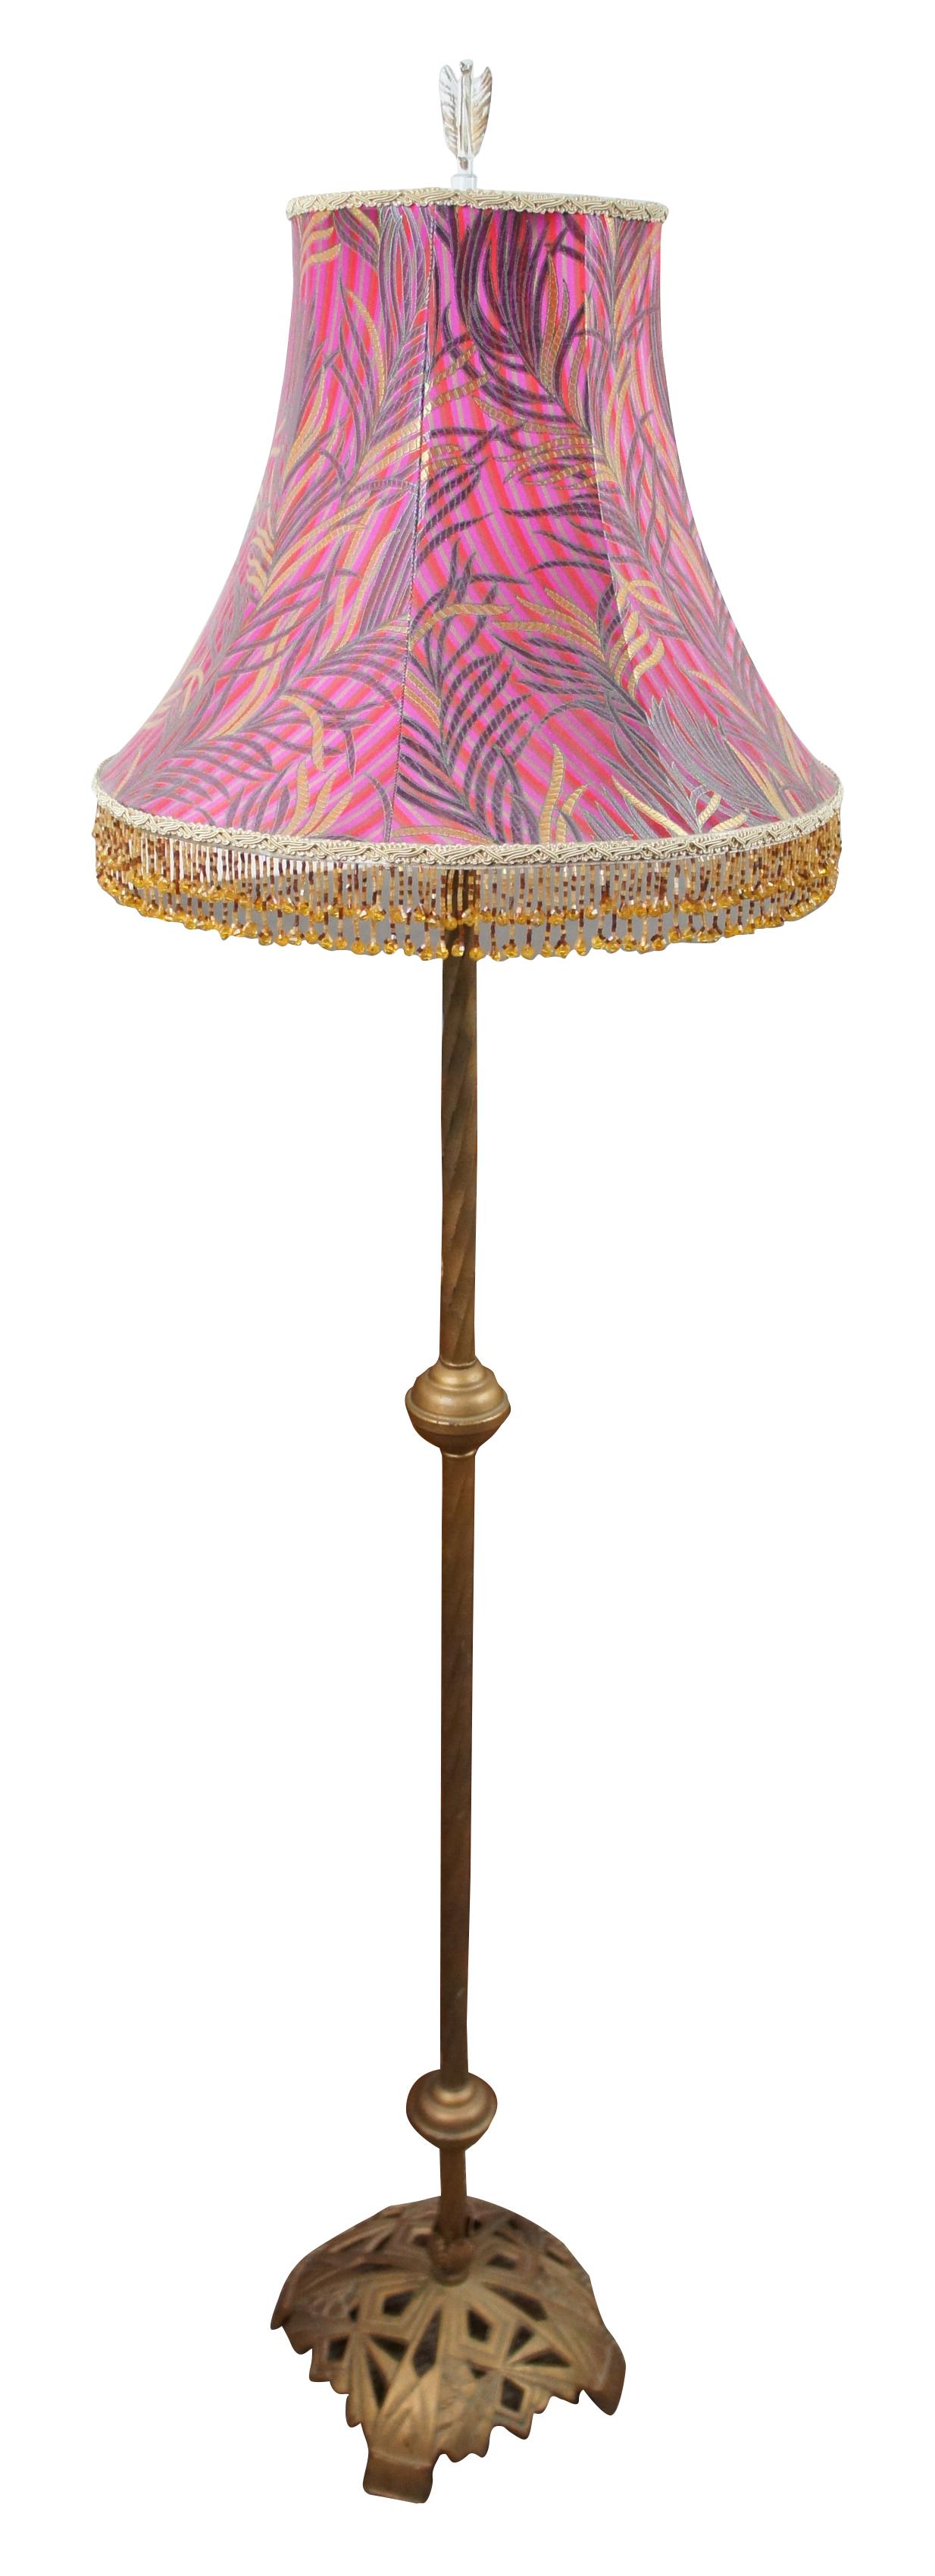 Antique Art Deco cast iron floor lamp with pink beaded jeweled fringe by Szoke Lamp Shades. Measures: 52